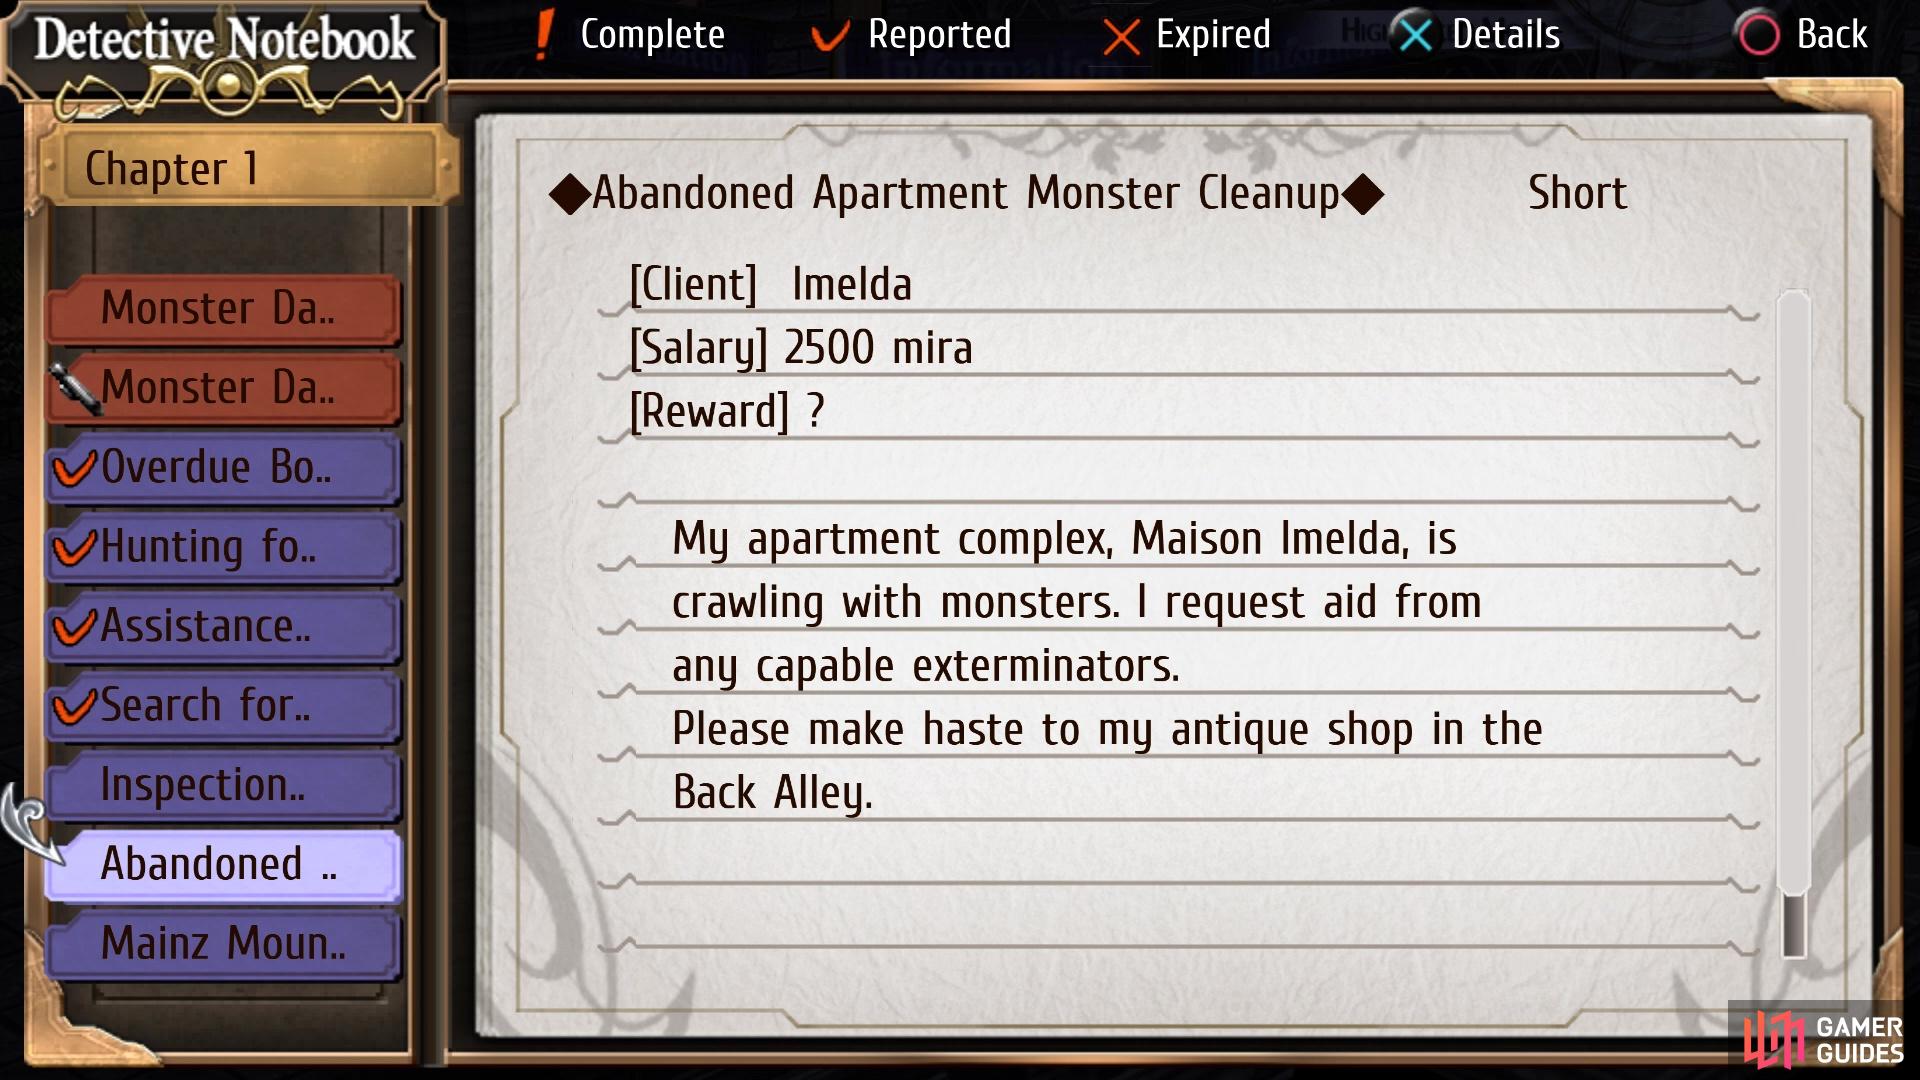 Looks like you're just going to clear the apartment of monsters